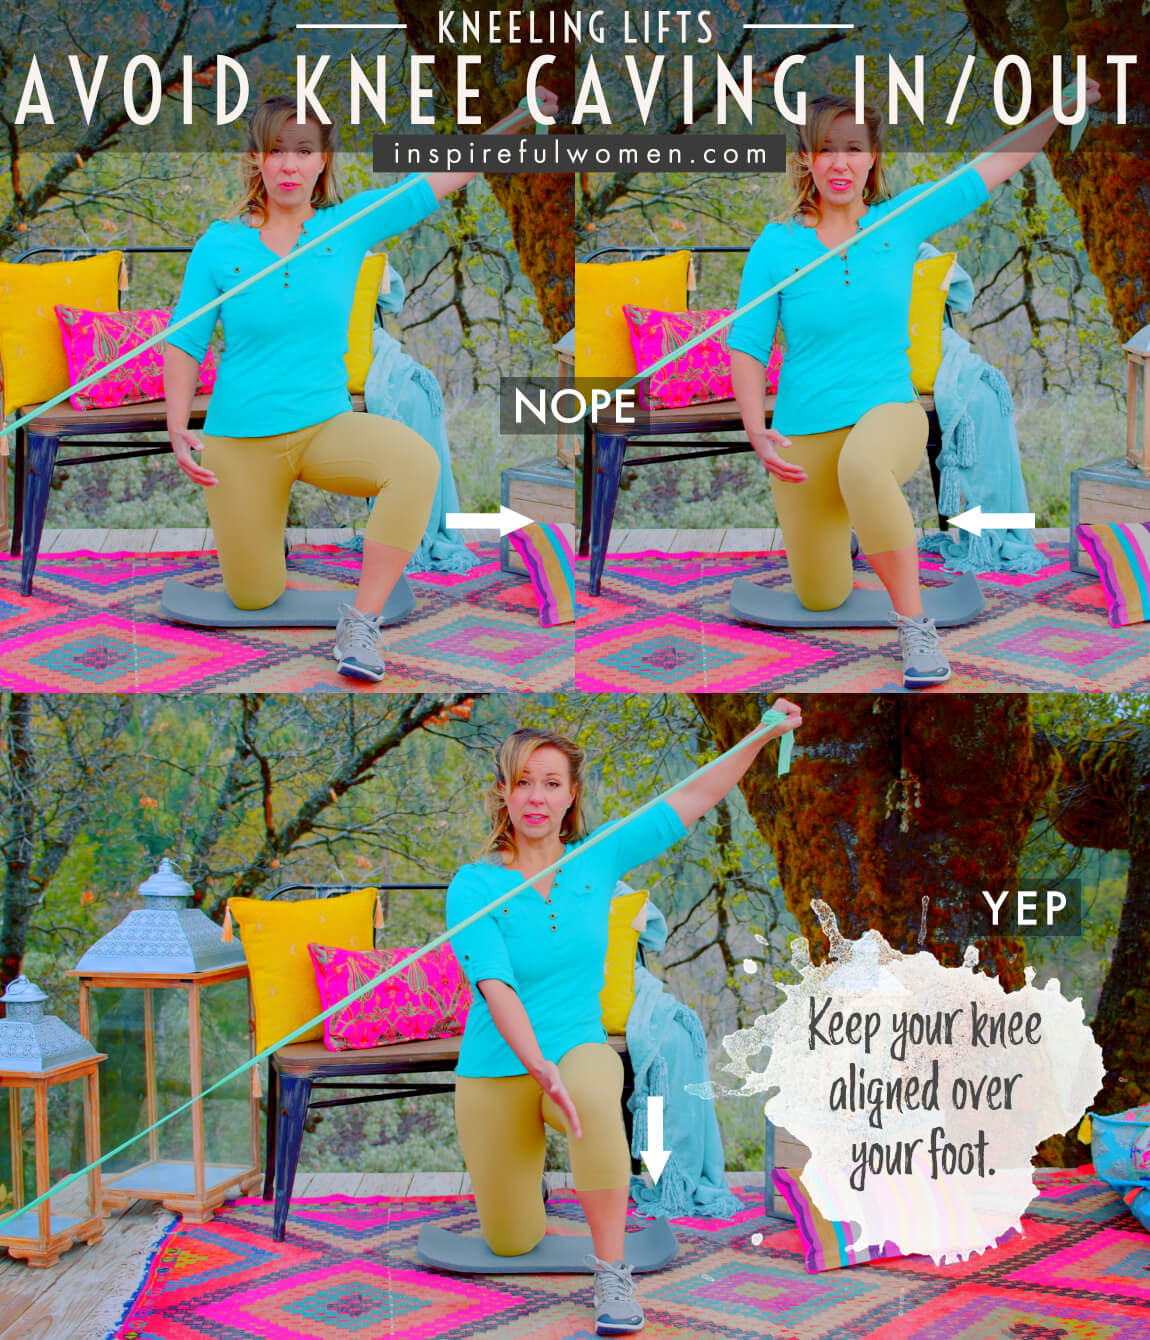 avoid-knee-caving-in-or-out-kneeling-lifts-core-exercise-proper-form